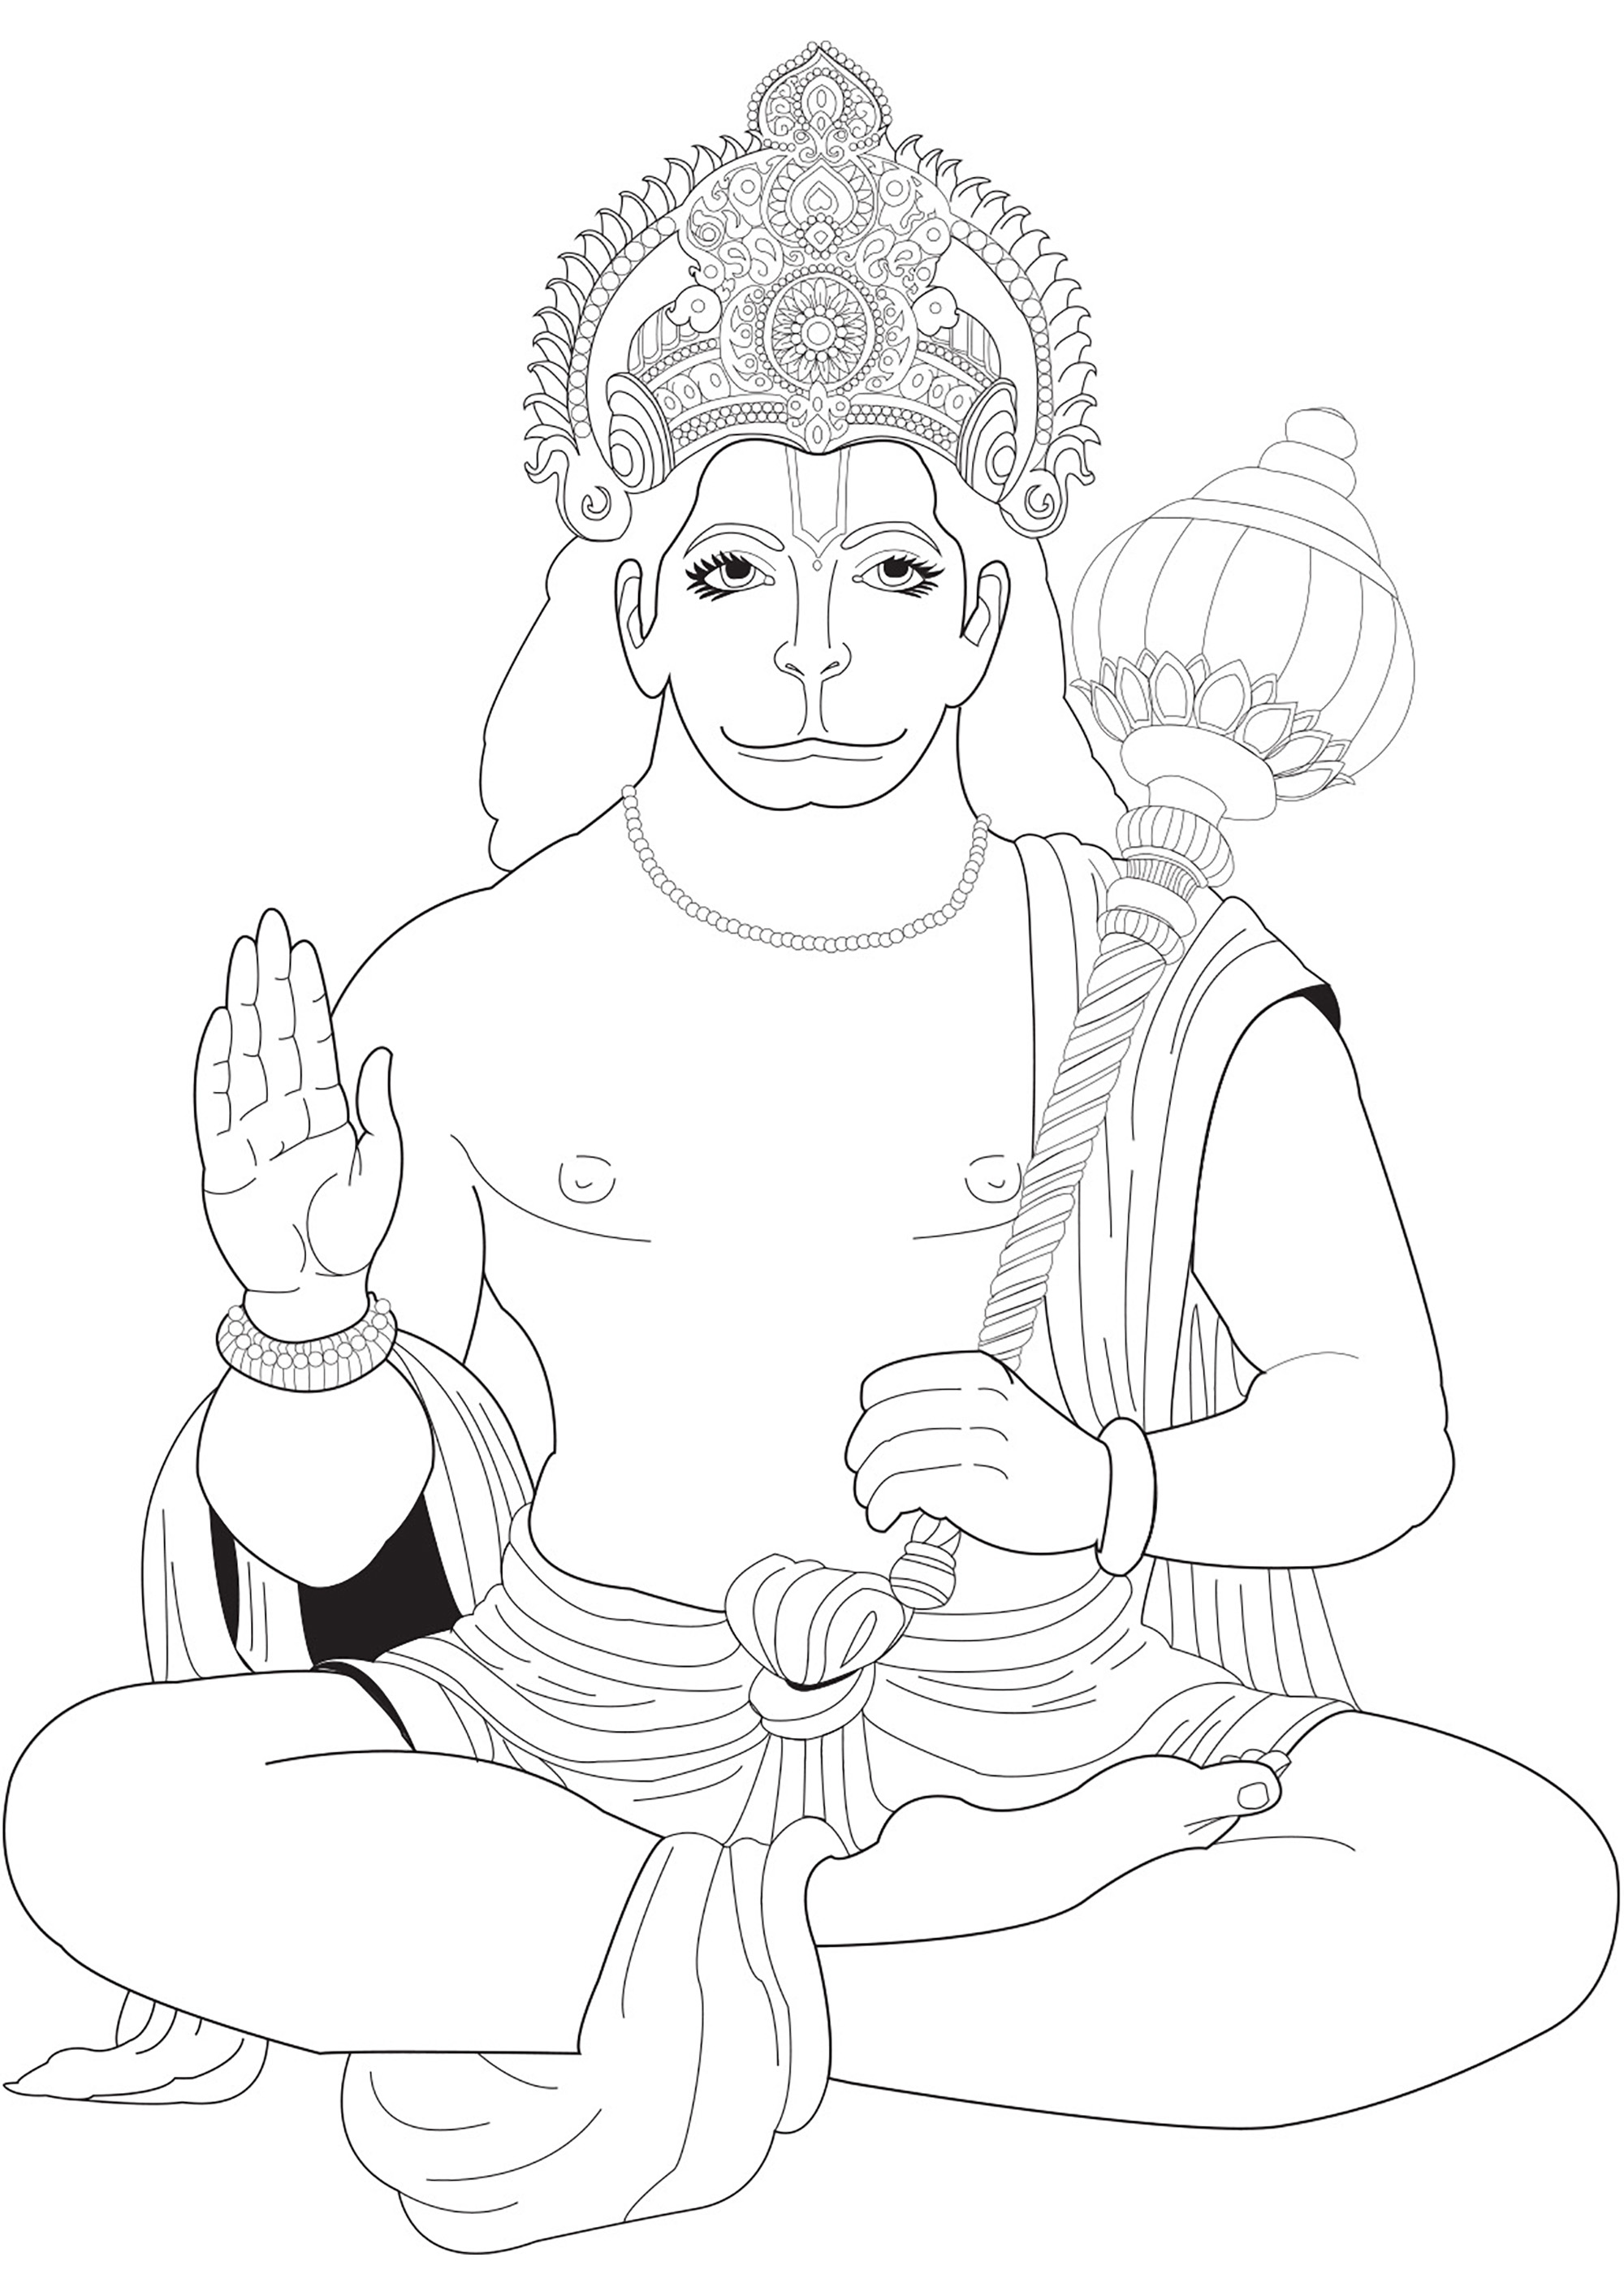 Hinduism coloring page to download